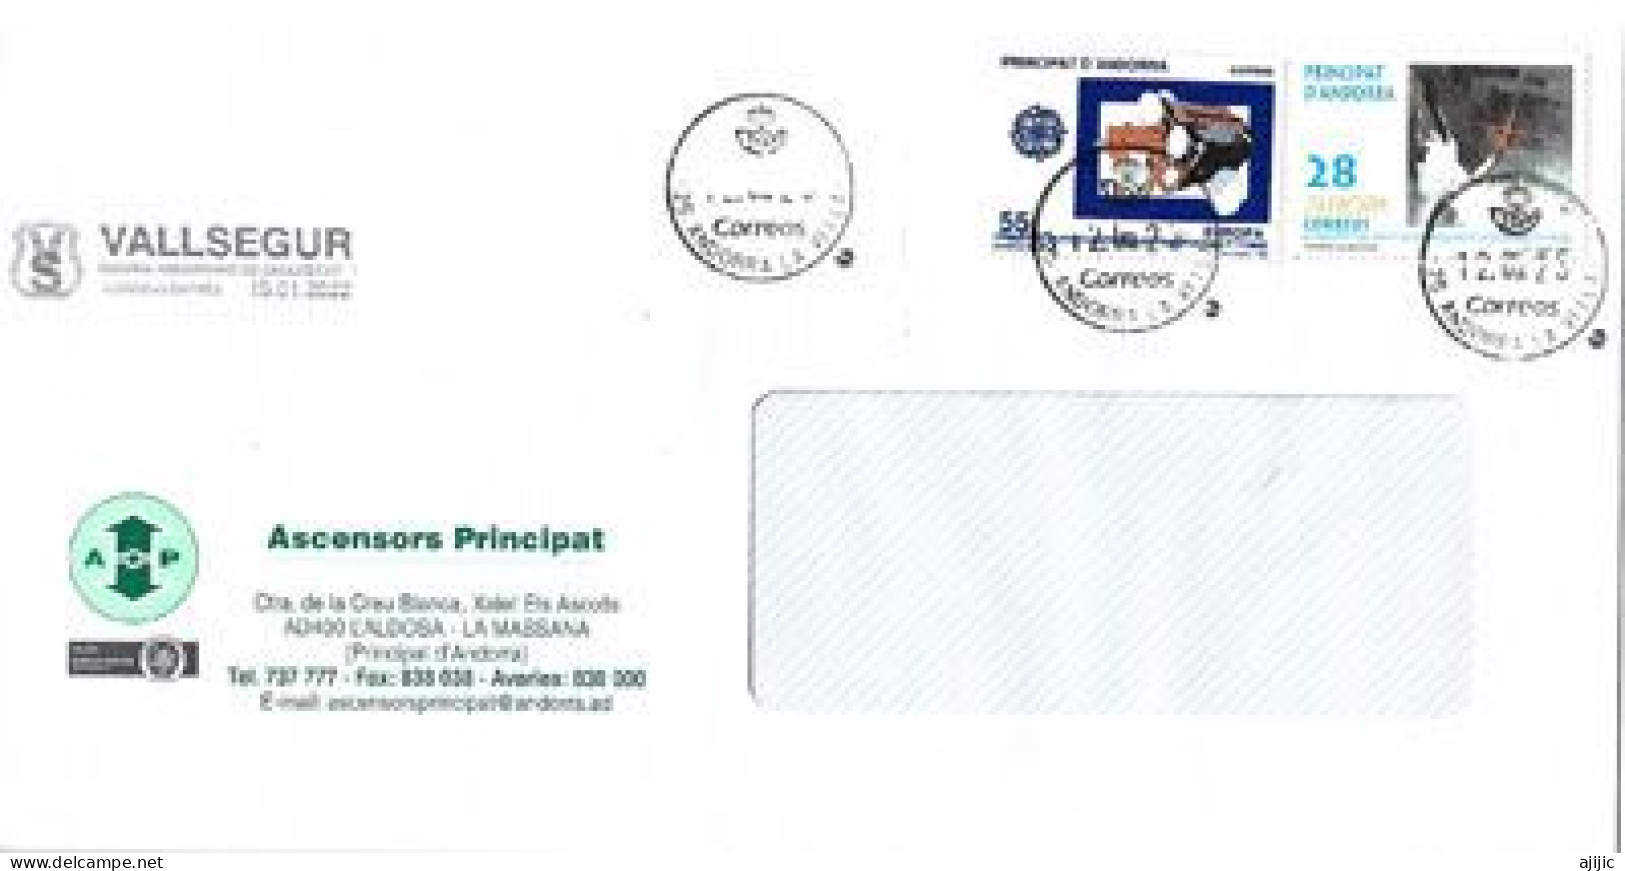 ANDORRA.Ascensors Principat, Letter (Andorra Commercial Postal ), Nice Round Cancels - Covers & Documents